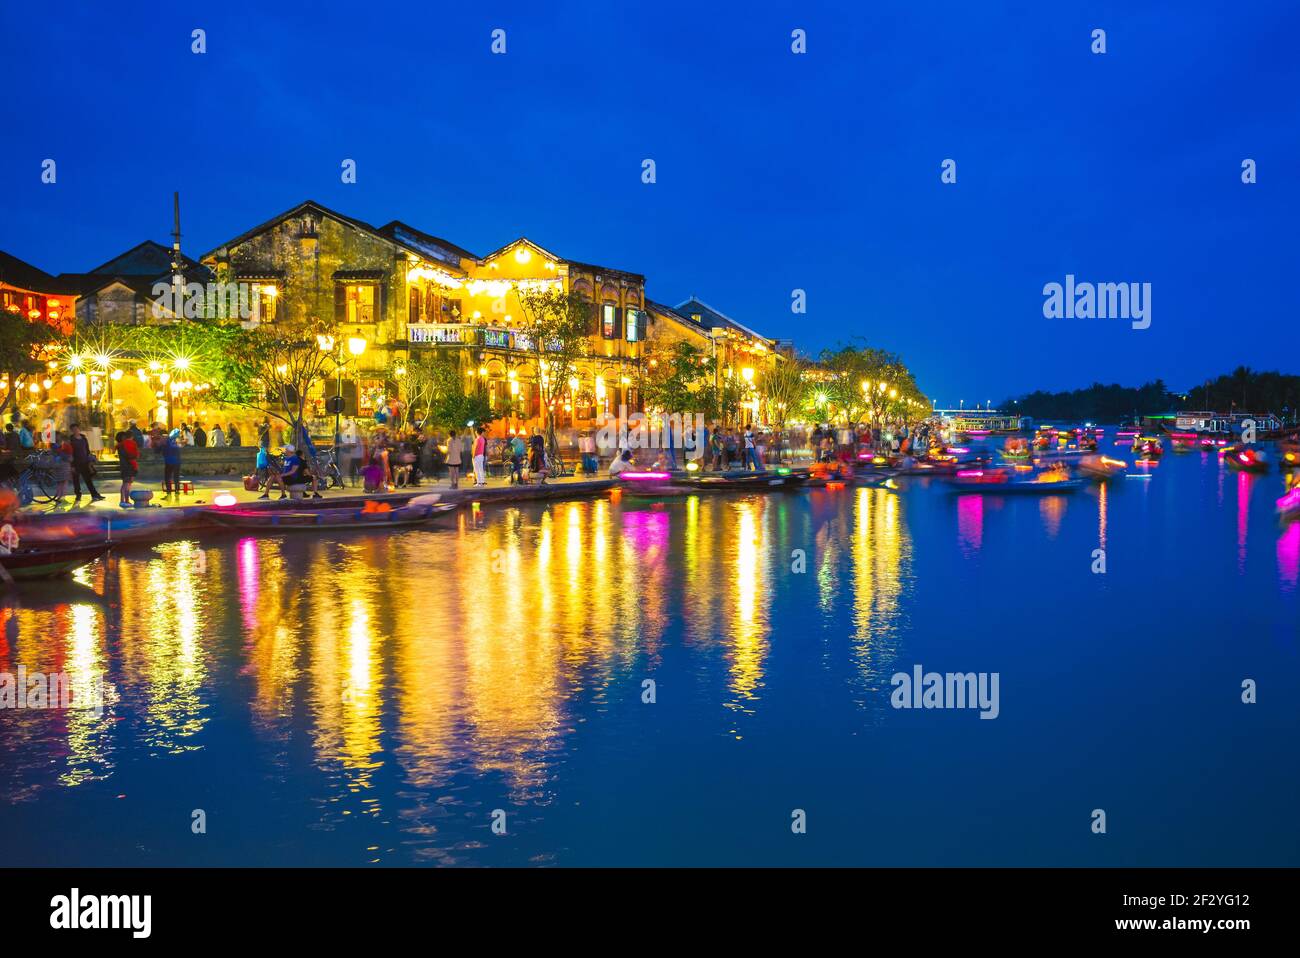 Hoi An ancient town by Thu Bon River in Vietnam at night Stock Photo